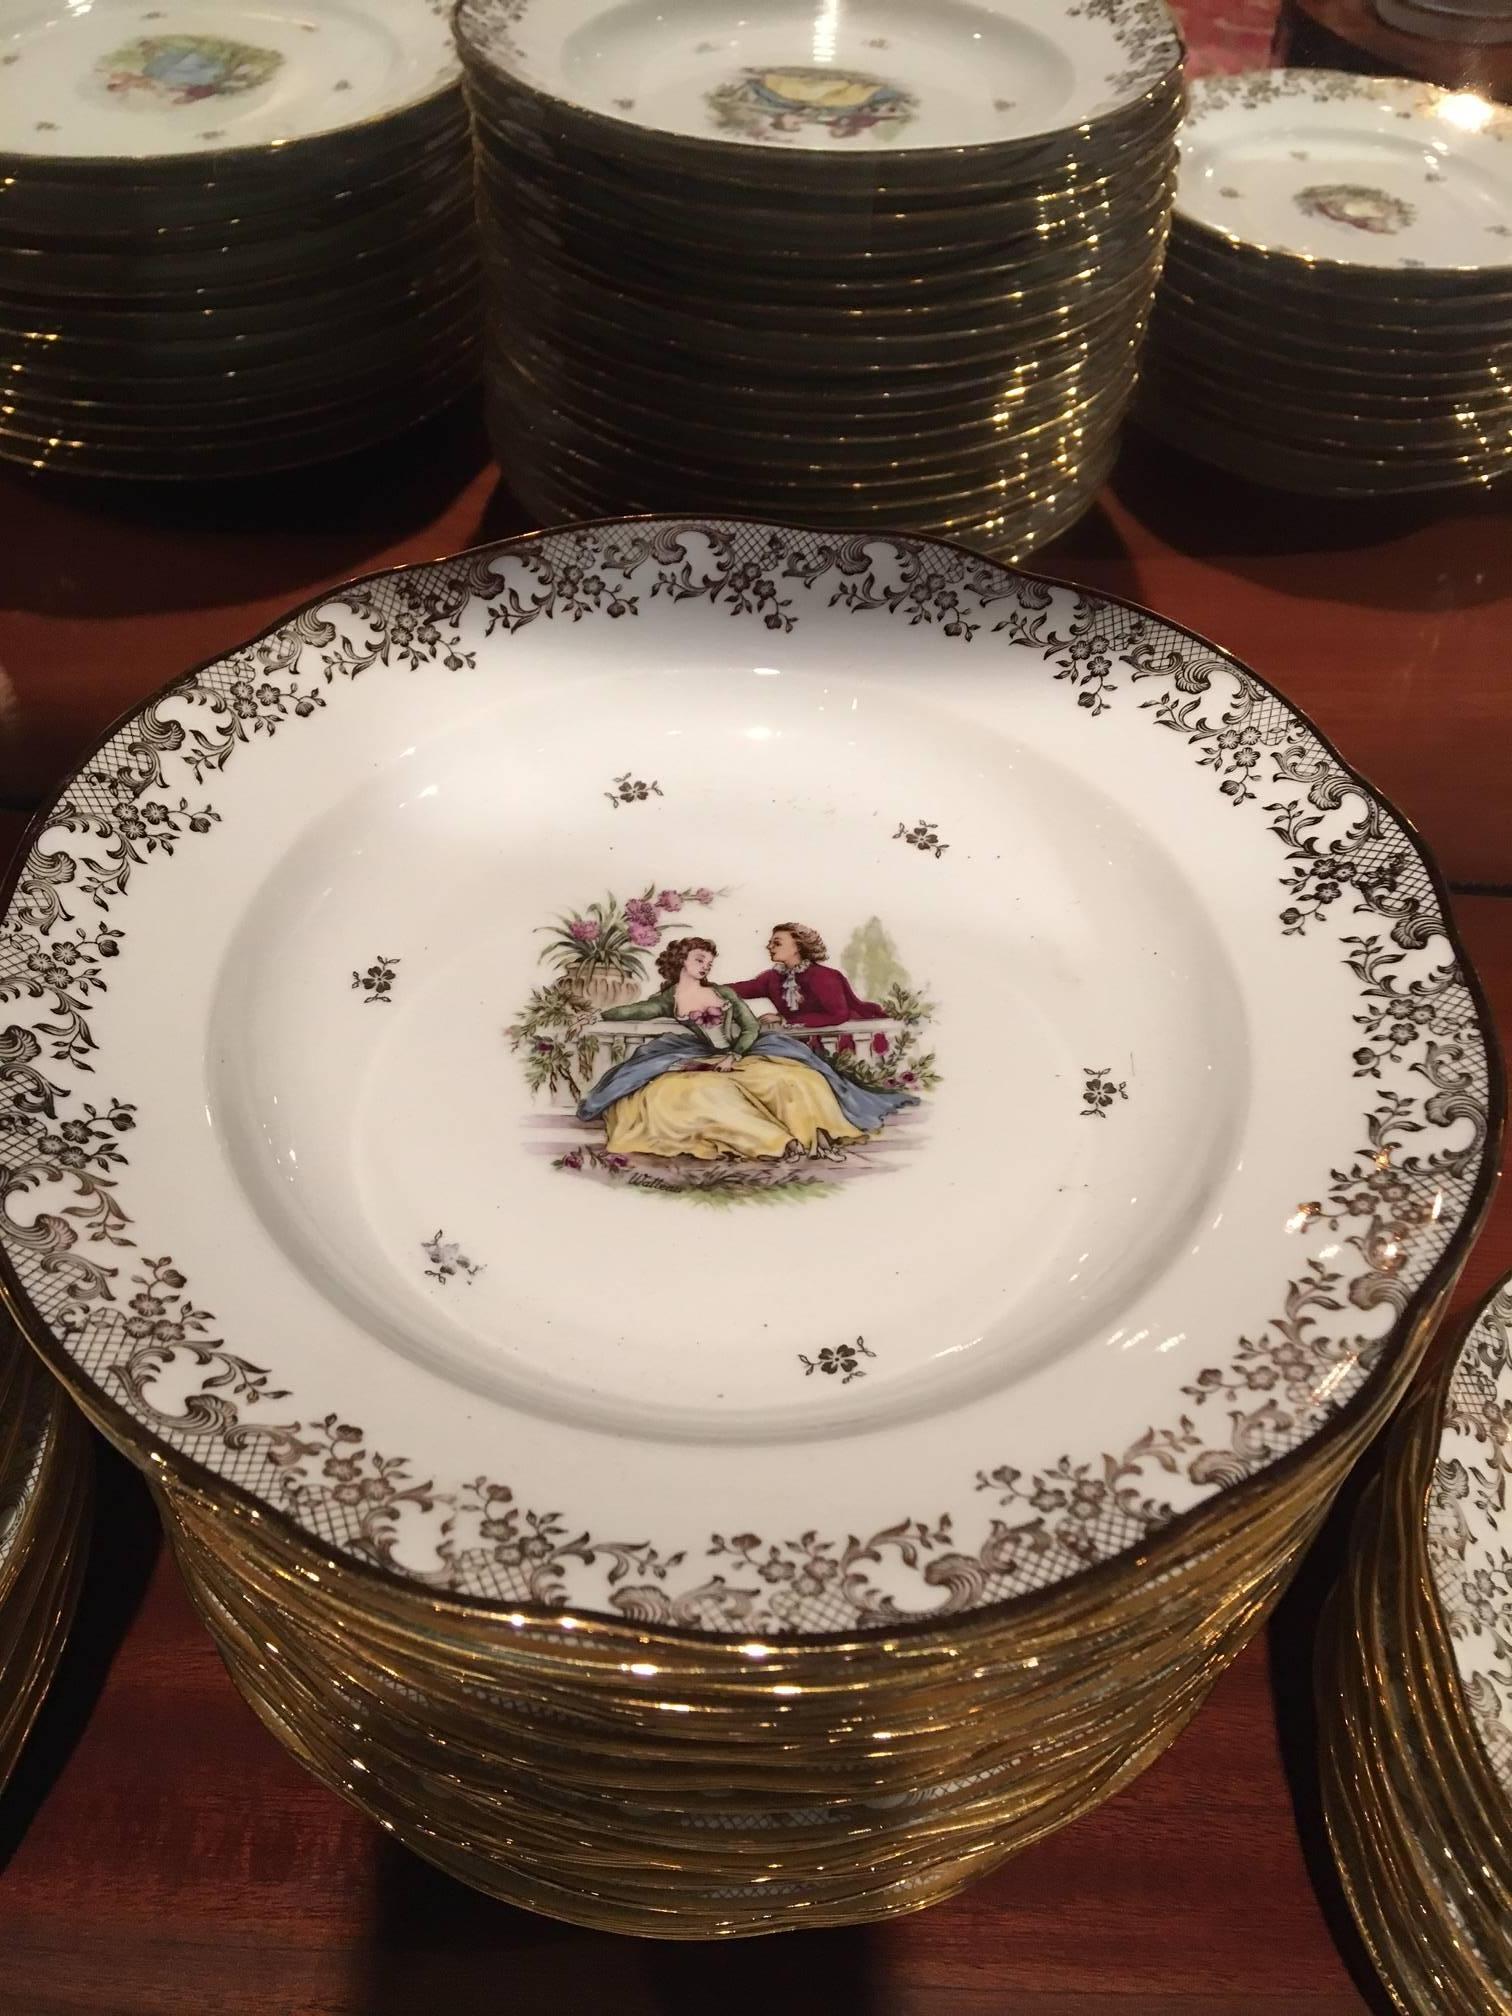 20th Century French Veritable Porcelain Dinnerware with Gold Scrolls, Landscape and People